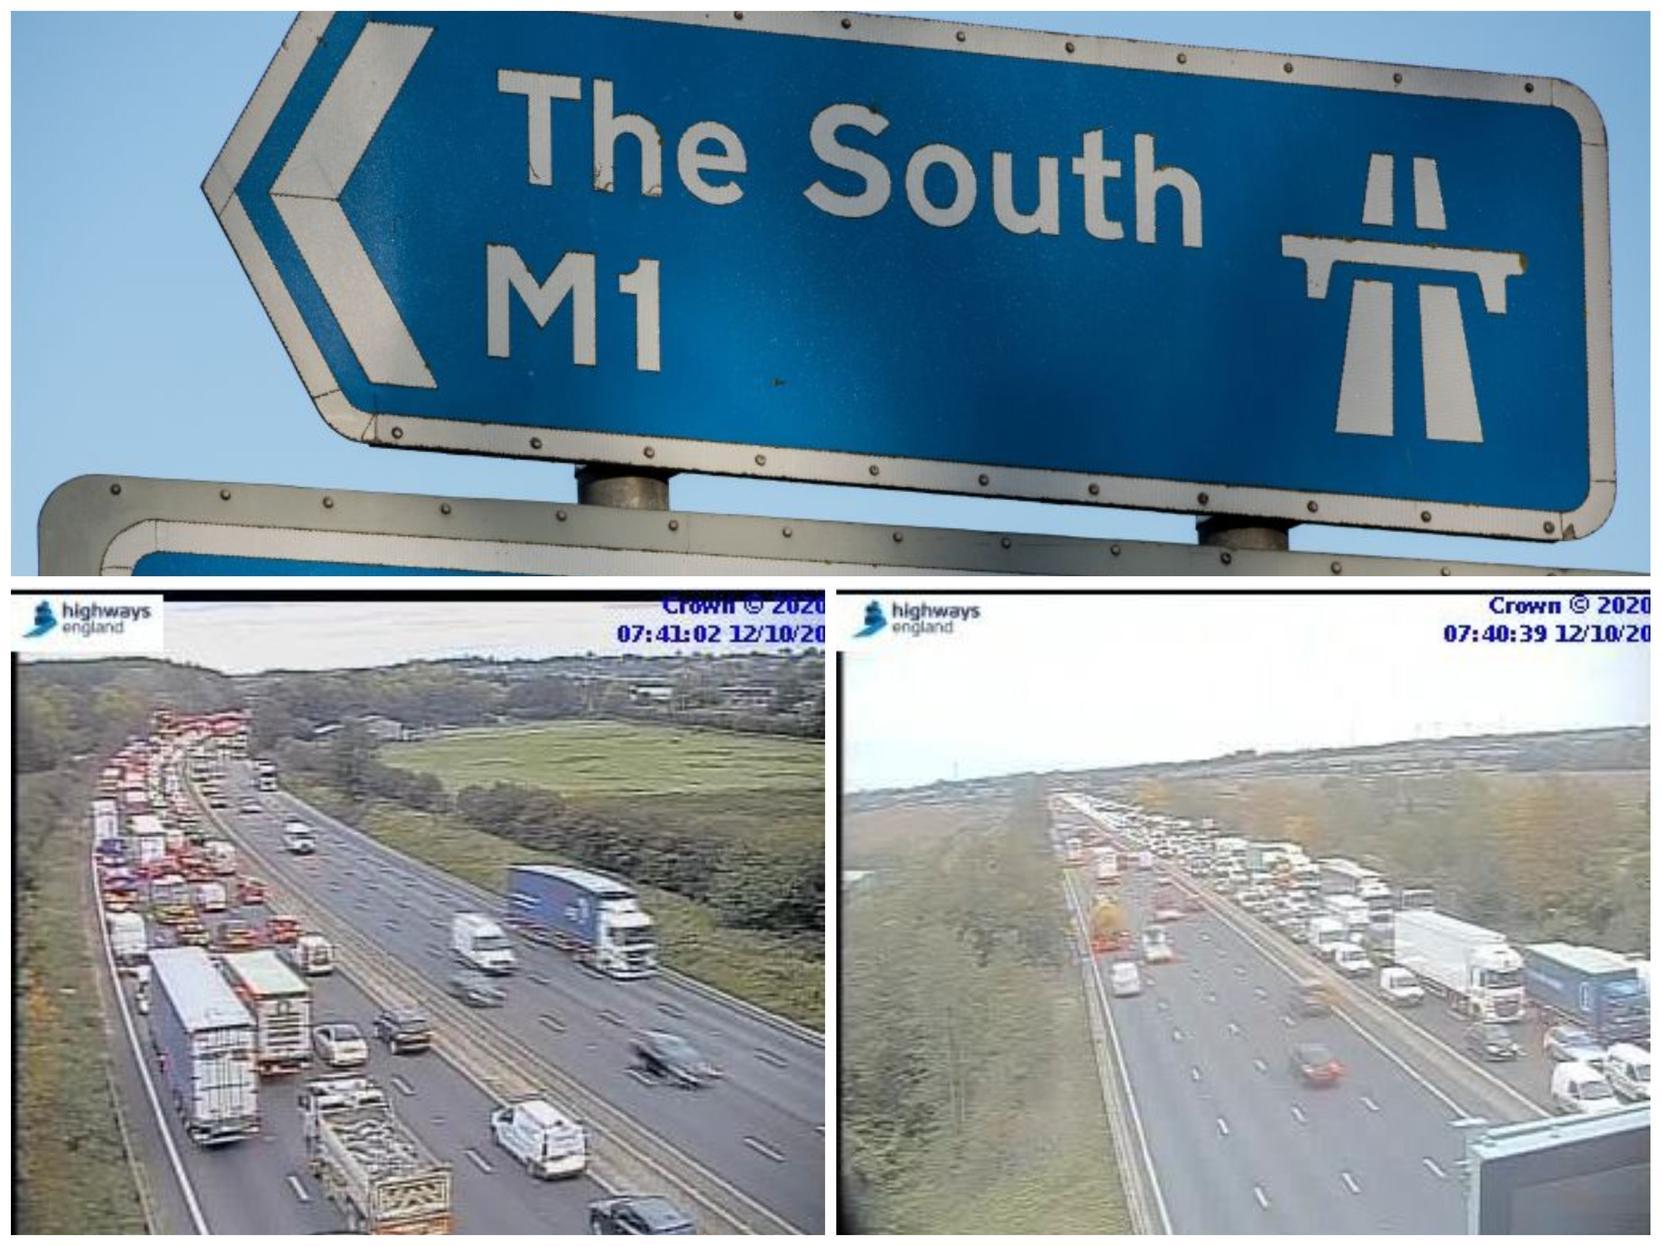 travel news m1 southbound today